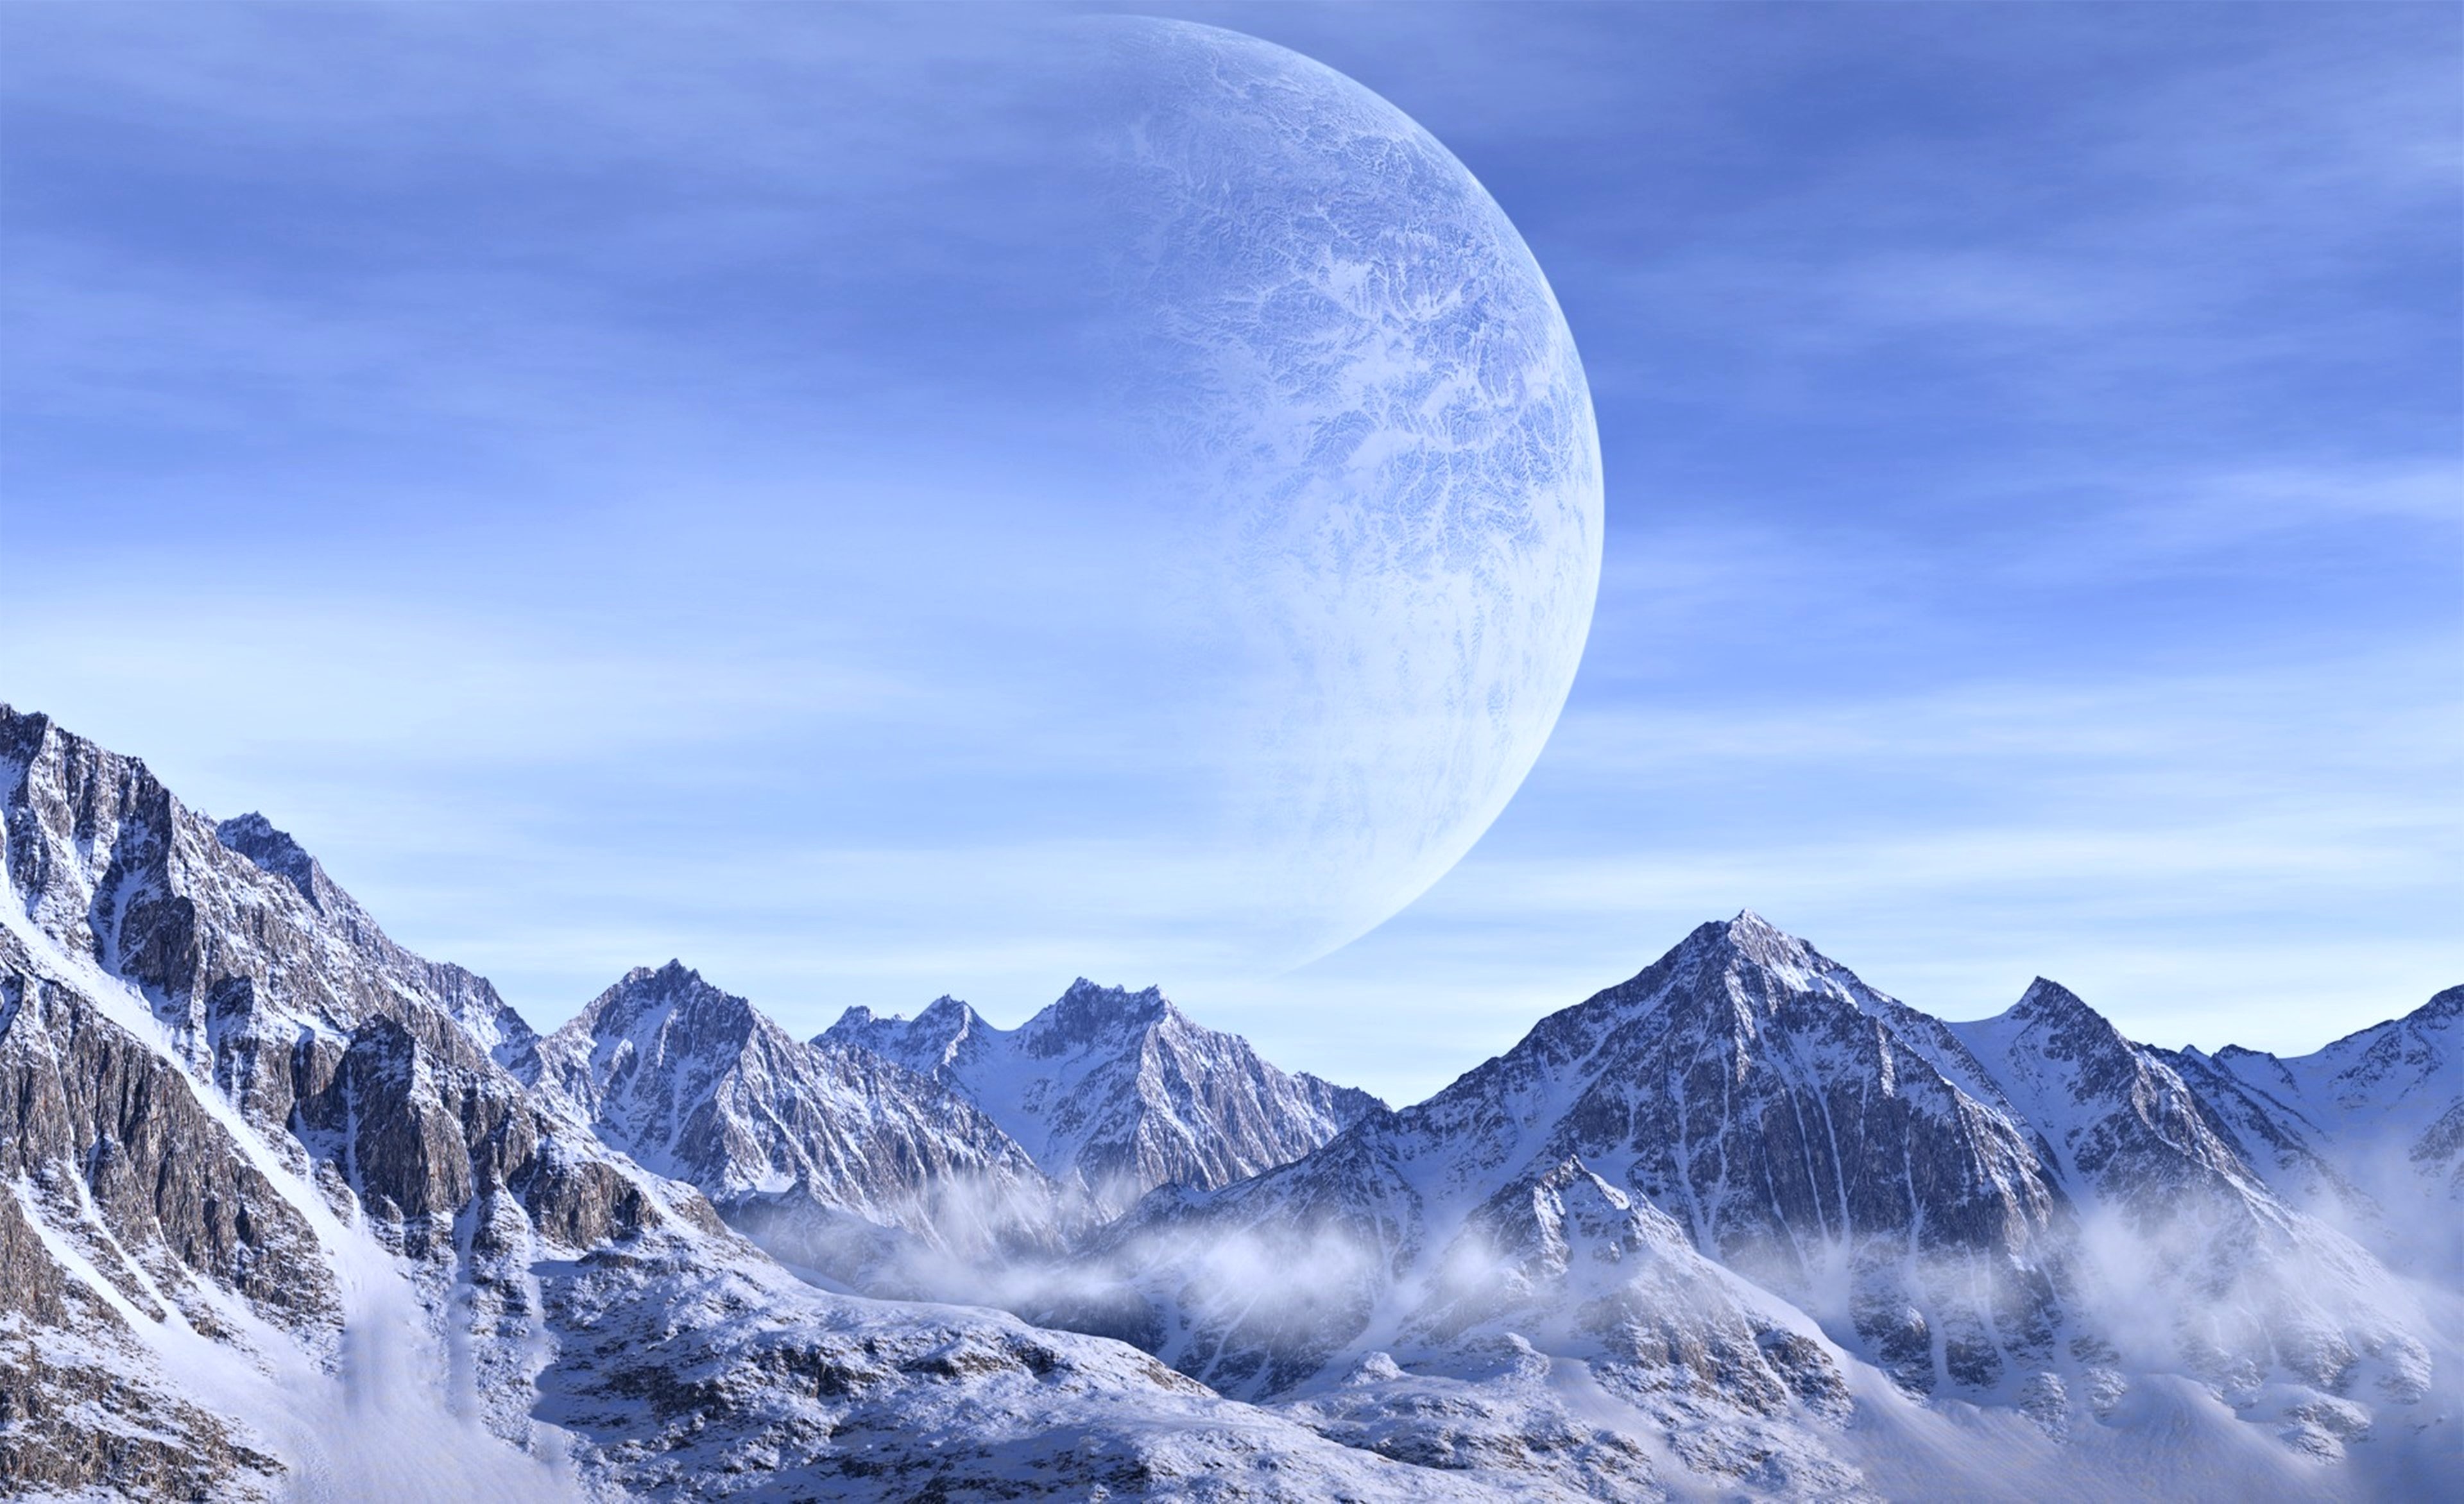 planets, Mountains, Snow, White, Sky, Space, Clouds, Imagination, Fantasy, Nature, Landscapes Wallpaper